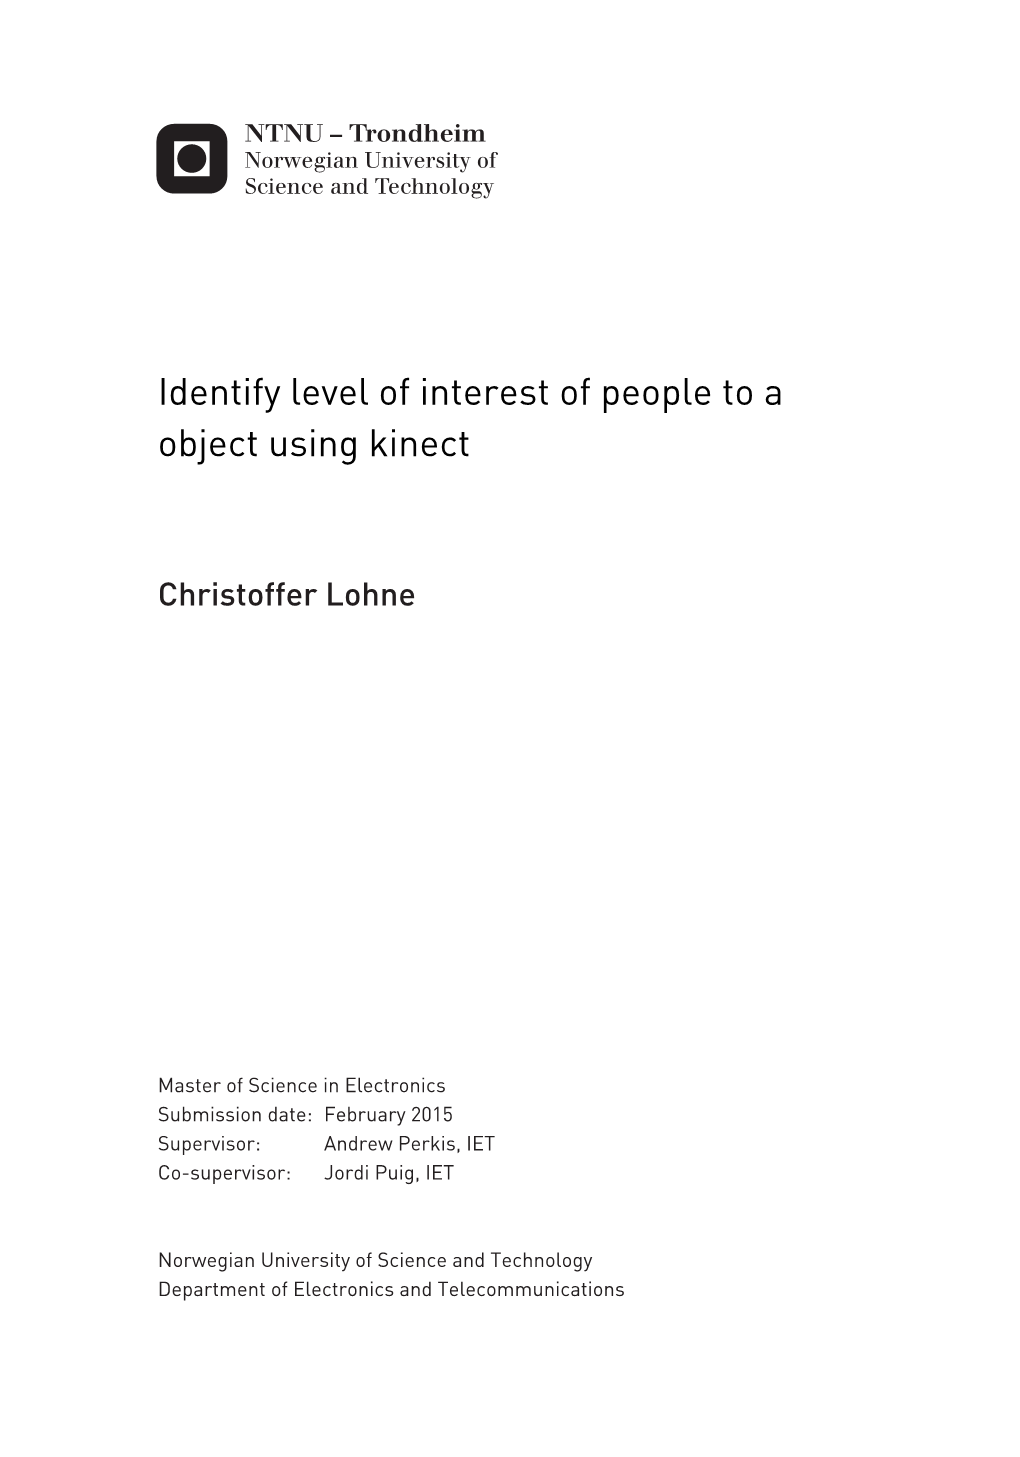 Identify Level of Interest of People to a Object Using Kinect